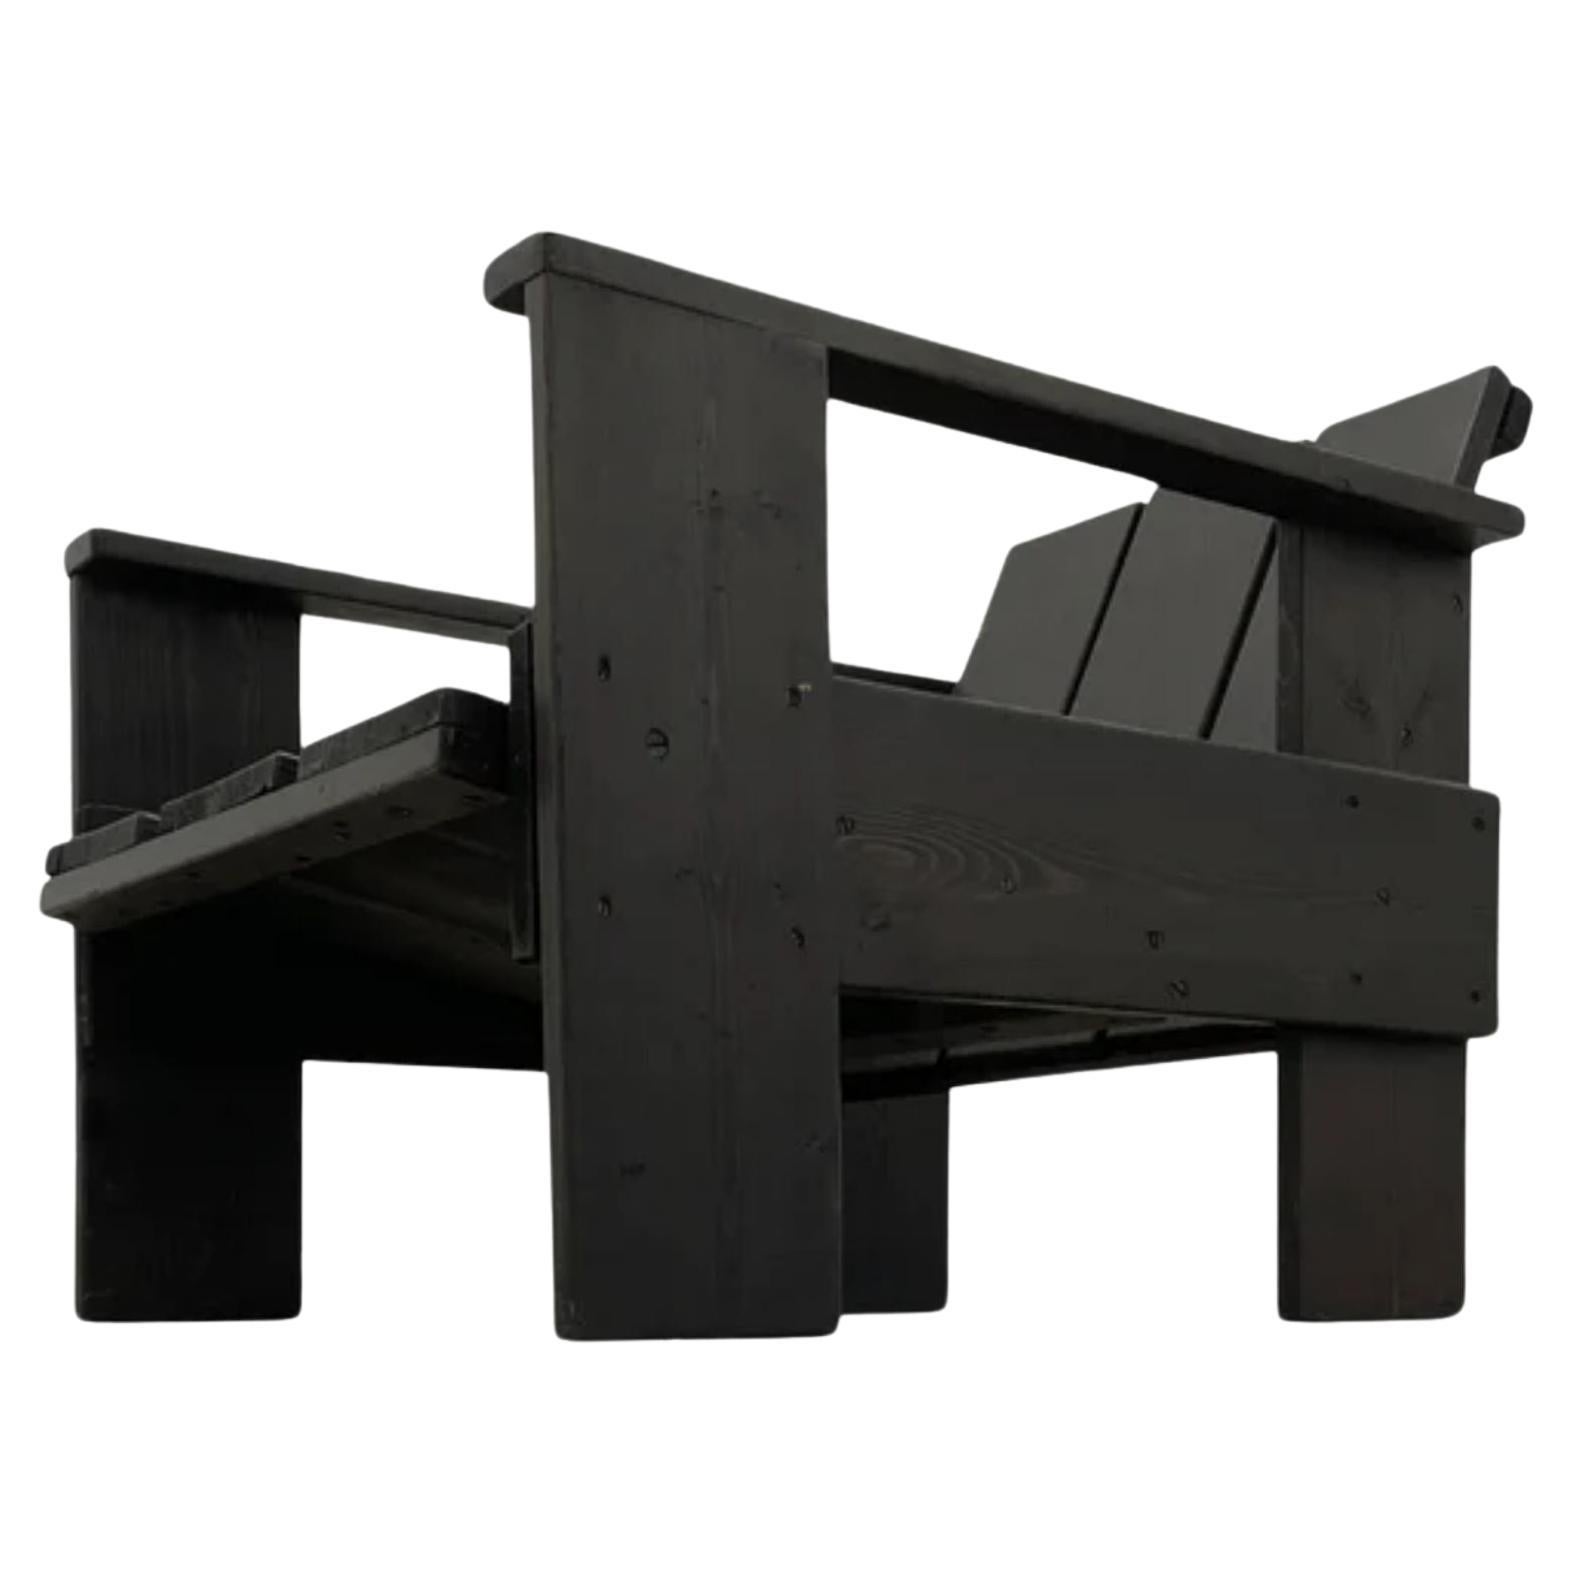 "Crate" Lounge Chair in Deal by Gerrit Rietveld, circa 1934